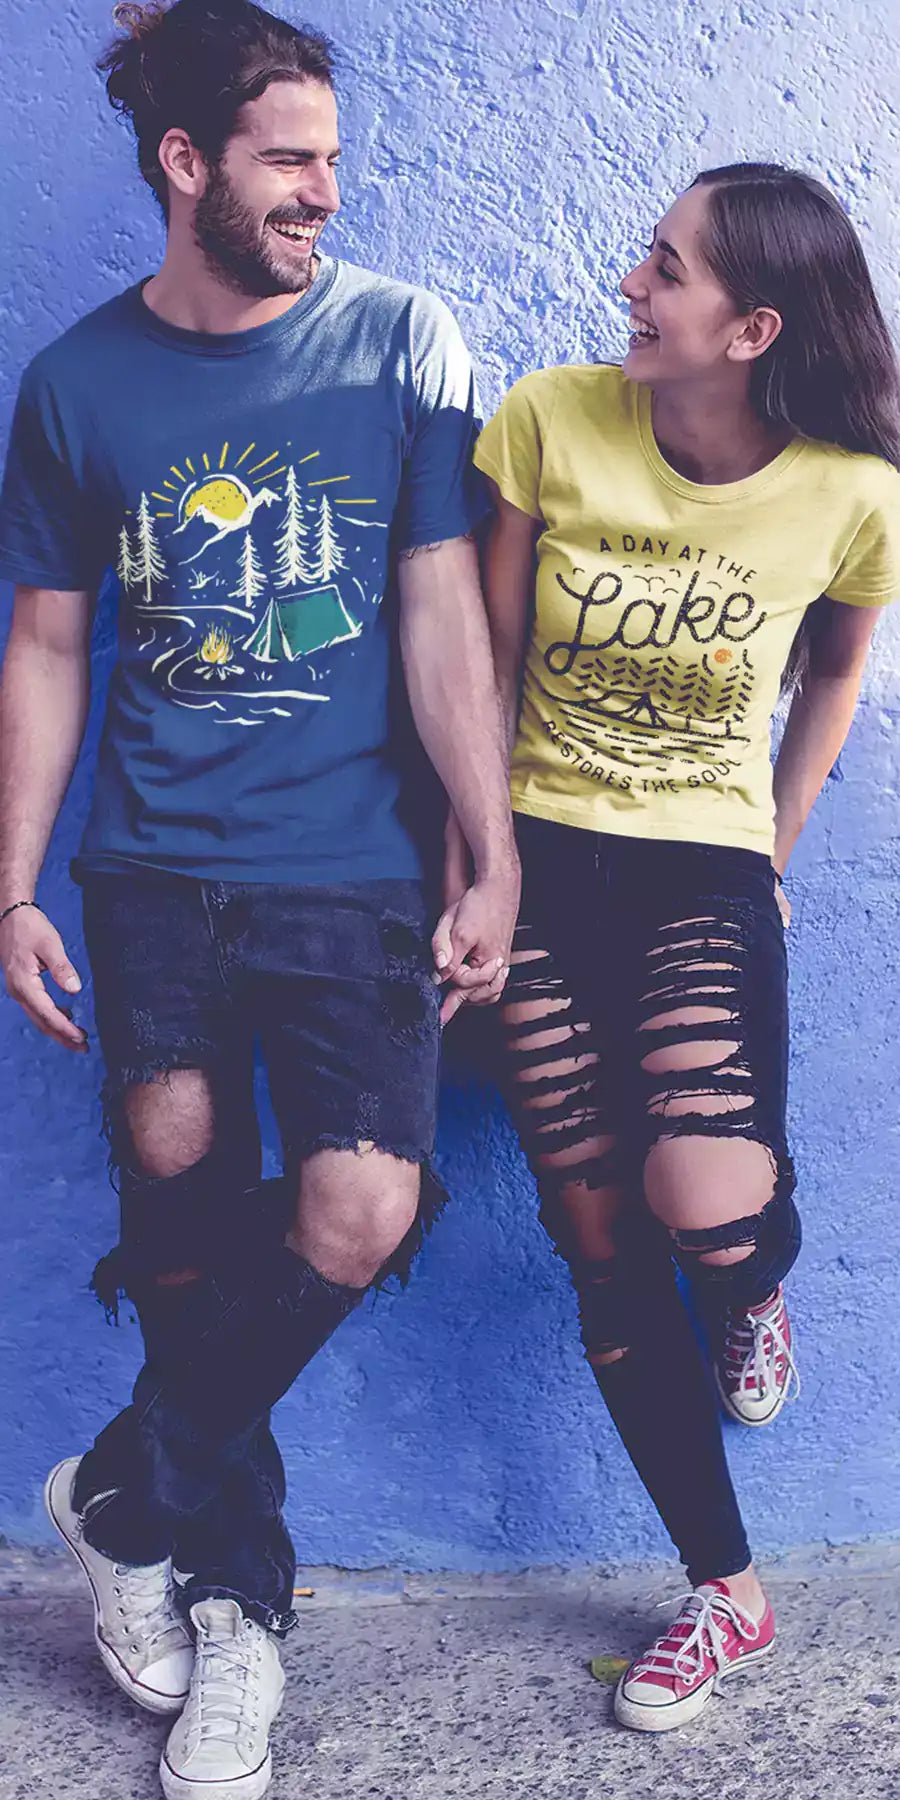 Young man and woman wearing printed t-shirts. The design on the women's yellow t-shirt retro lines graphic and text - A day at the lake. The design on the men's t-shirt is a retro graphic with mountains, sun, river, tent in the forest and a burning fire